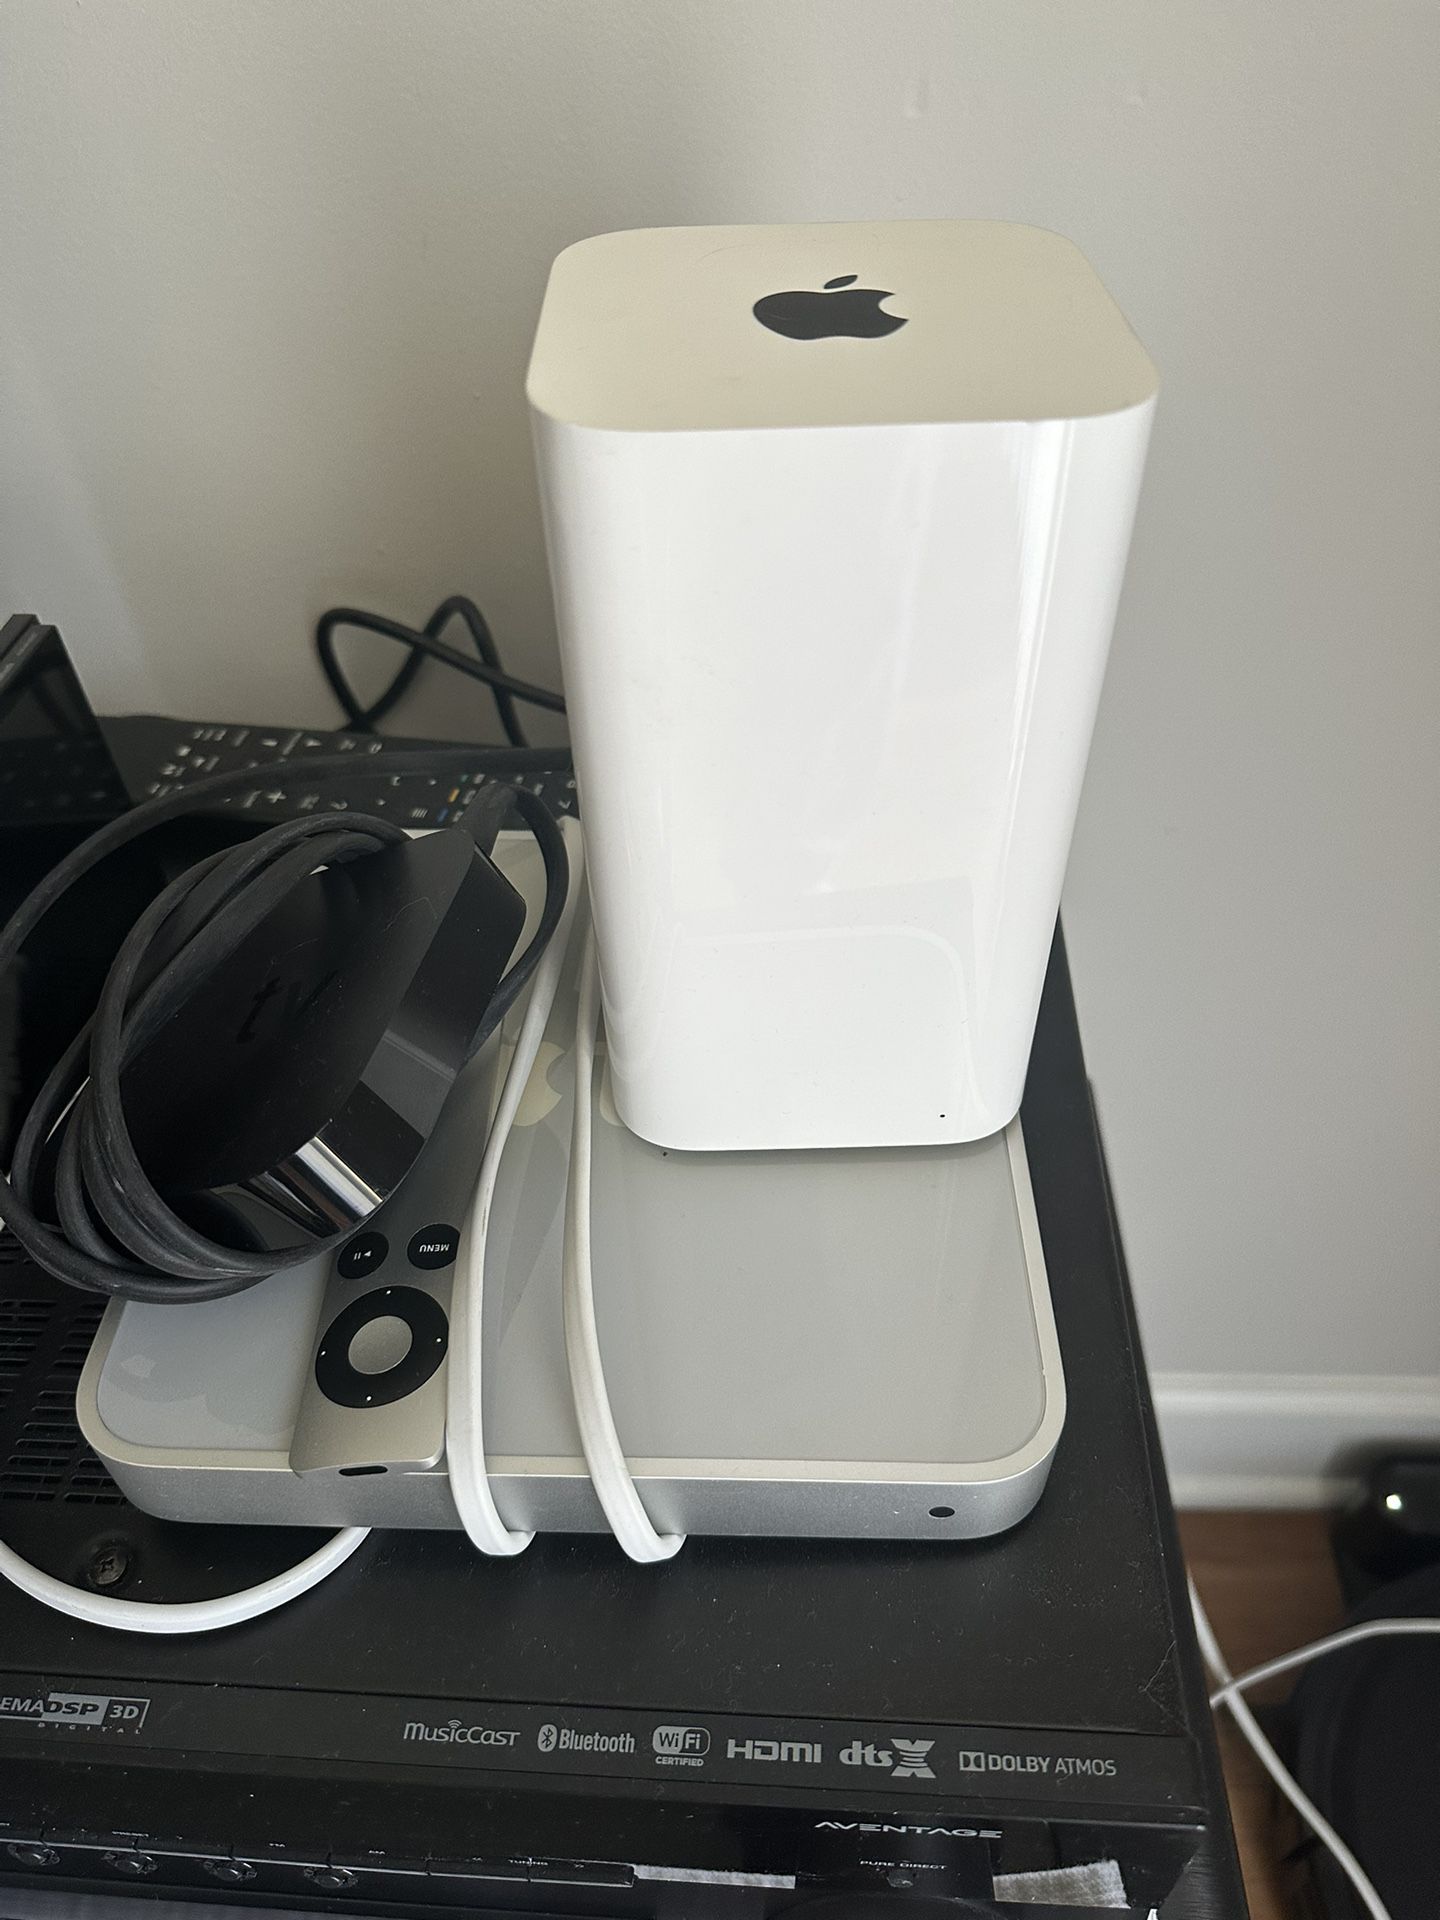 Apple Airport Extreme Router, Apple Tv 2nd Gen